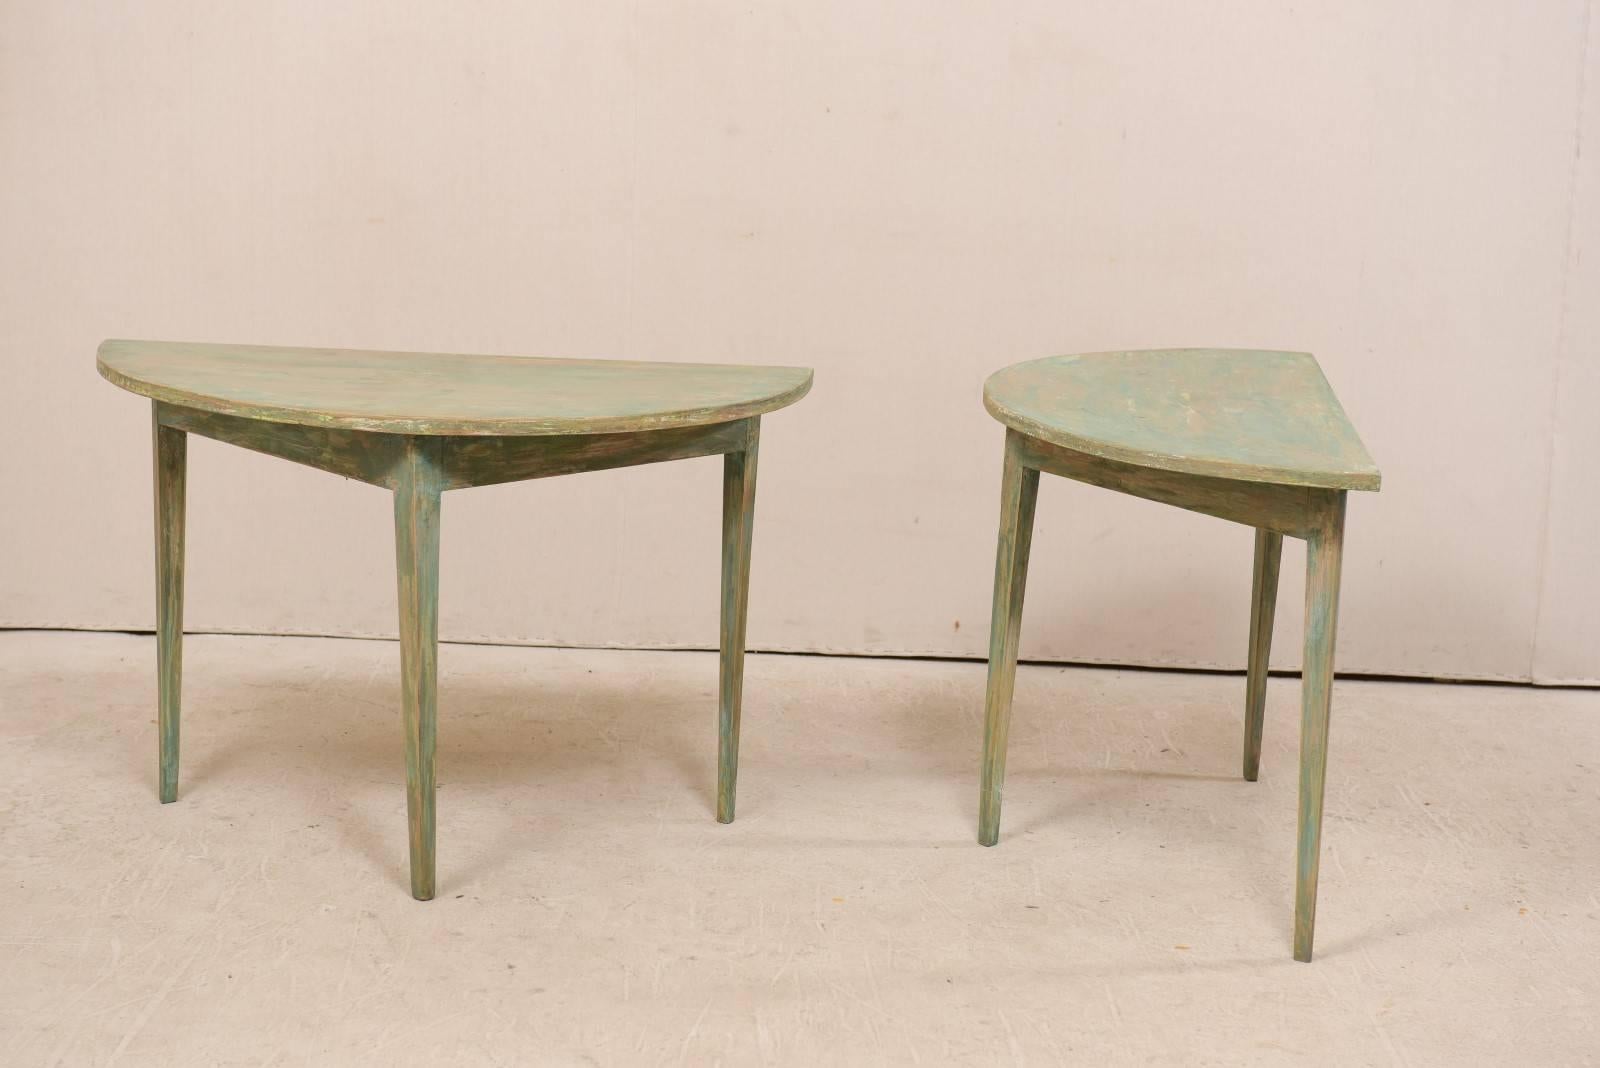 Carved Pair of Swedish 19th Century Painted Wood Demilune Tables with Tapered Legs